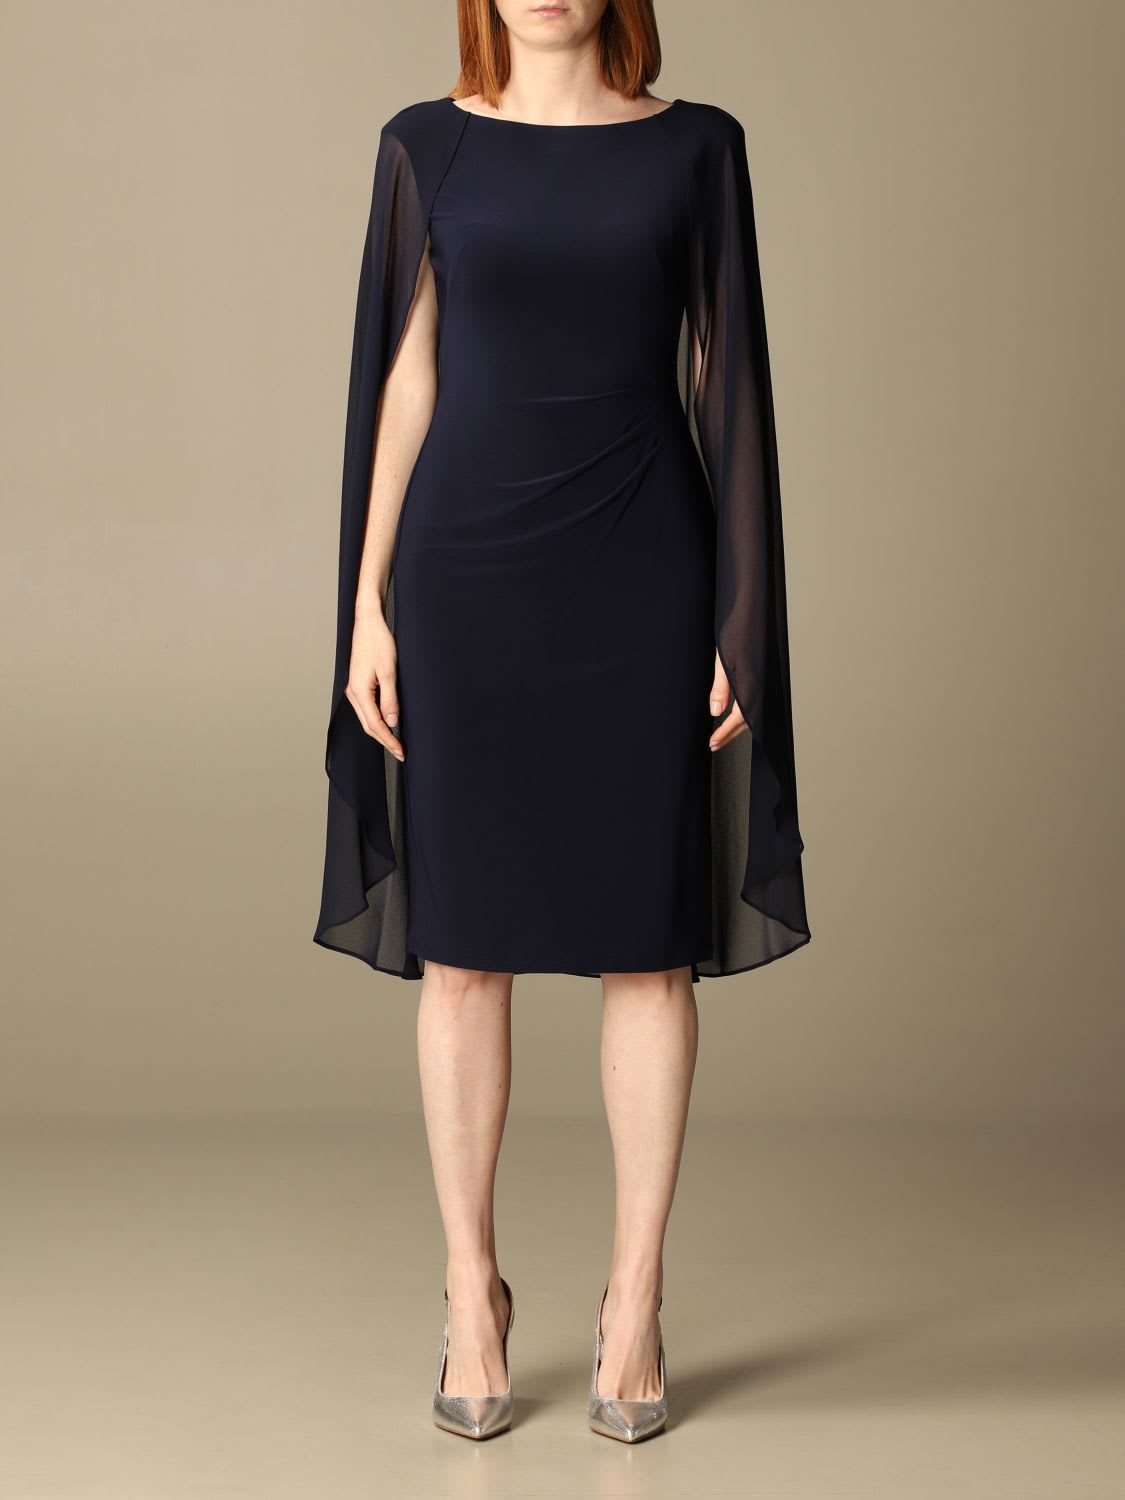 Lauren Ralph Lauren Dress Lauren Ralph Lauren Short Dress With Cape